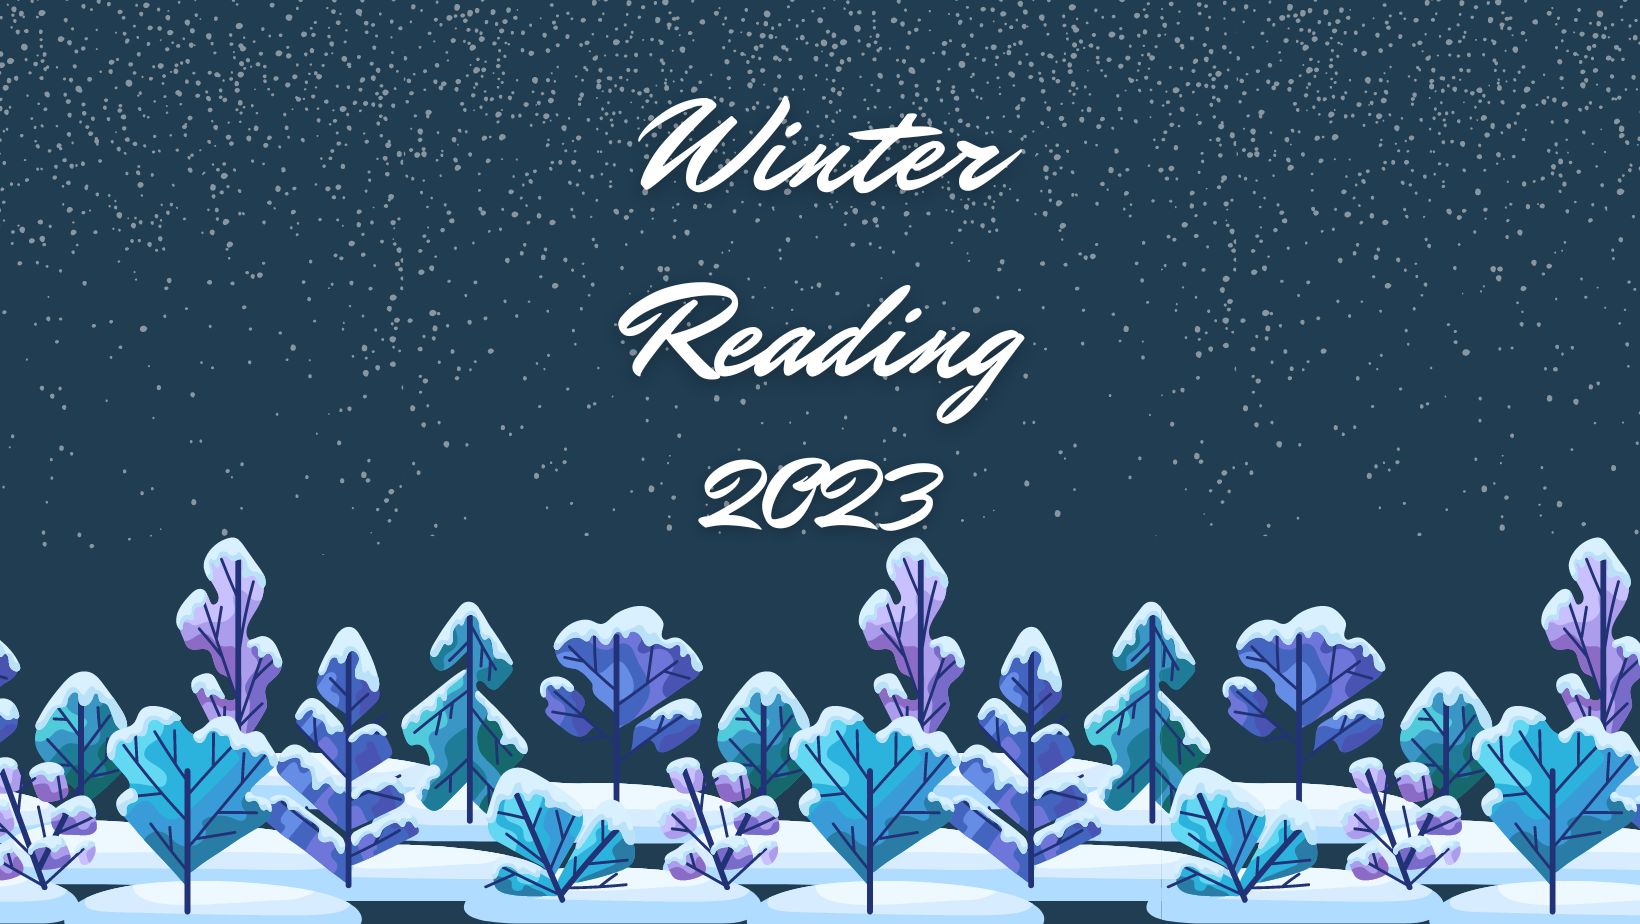 Dark blue background with the words Winter Reading 2022 in white script